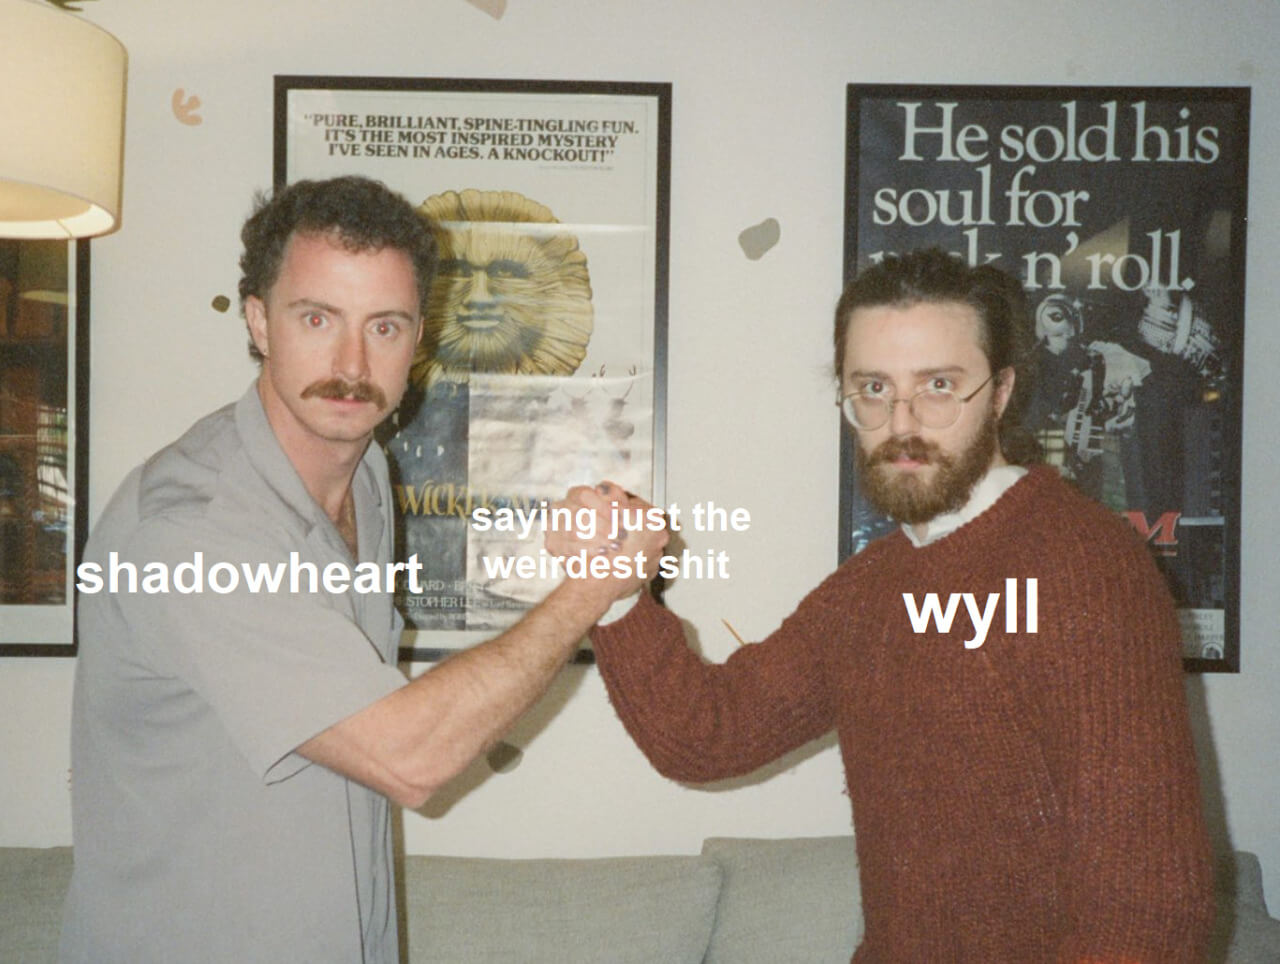 Wyll and Shadowheart both saying just the weirdest shit